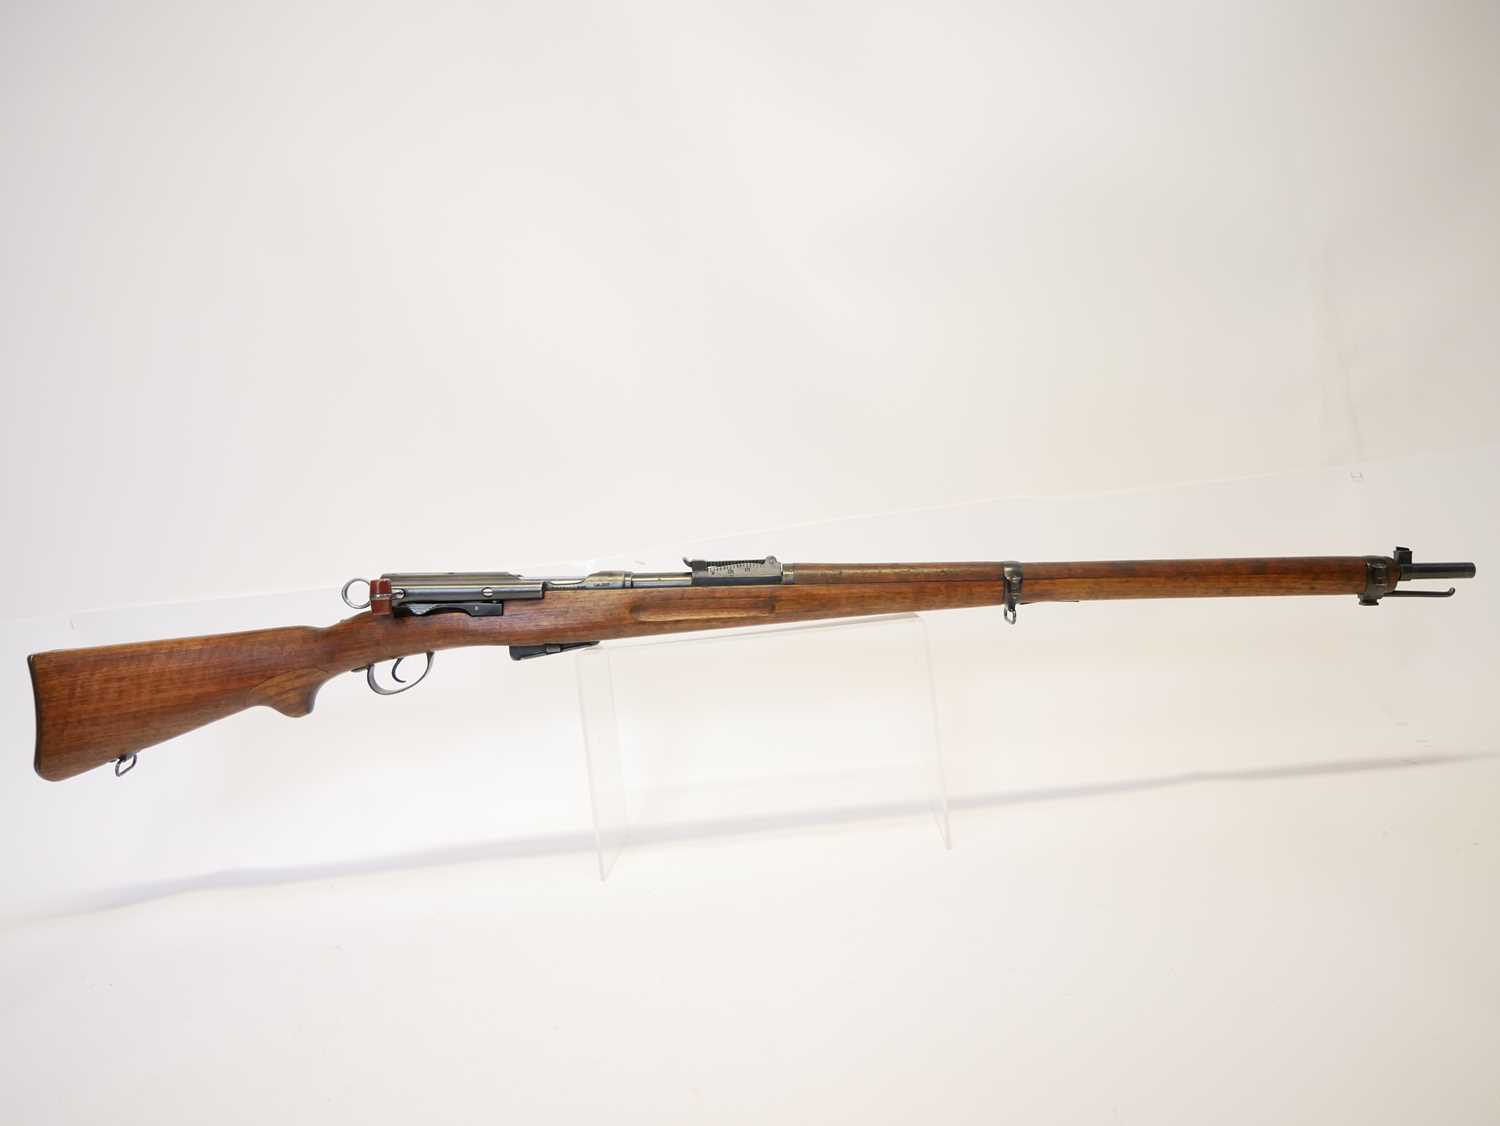 Schmidt Rubin 1896 7.5mm straight pull rifle, matching serial numbers 268510 to barrel, receiver, - Image 2 of 15